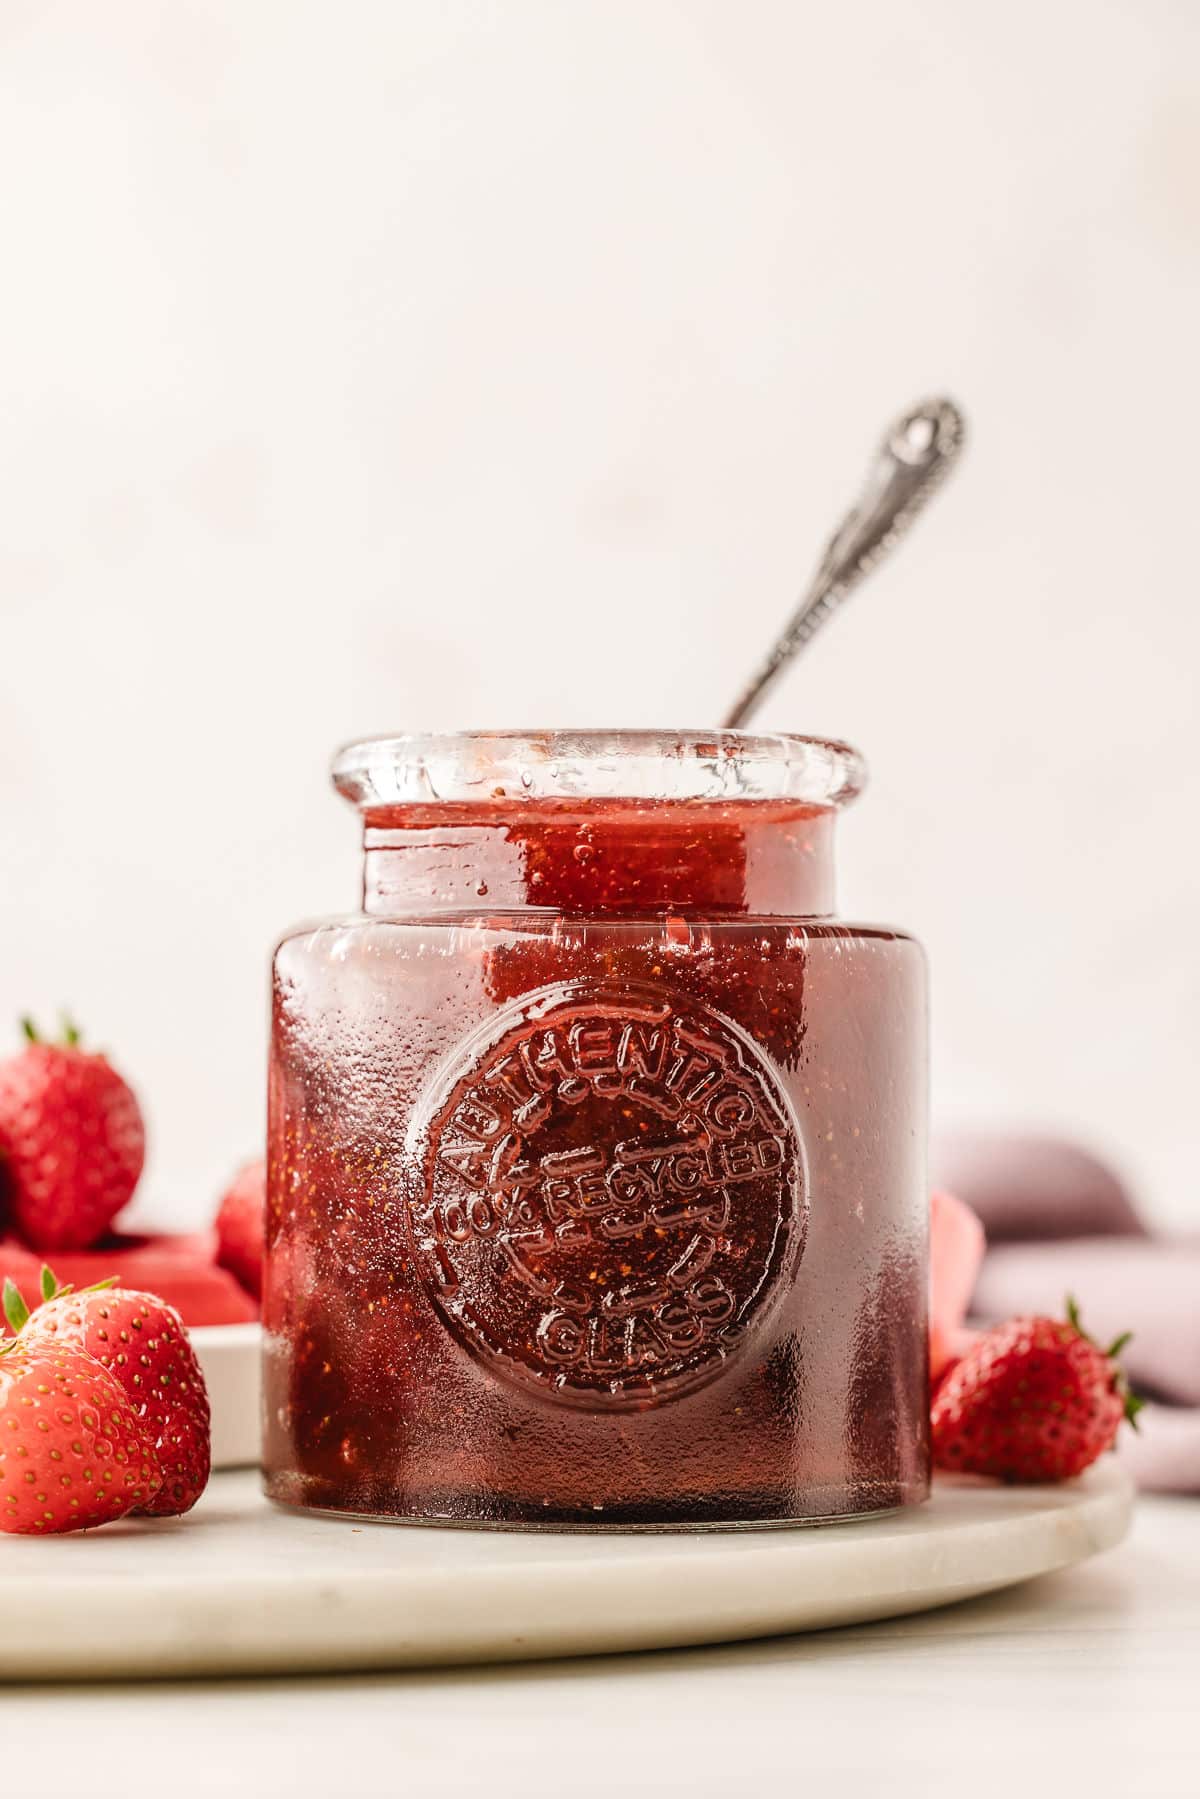 A glass jar full of strawberry rhubarb jam with a silver spoon in it.